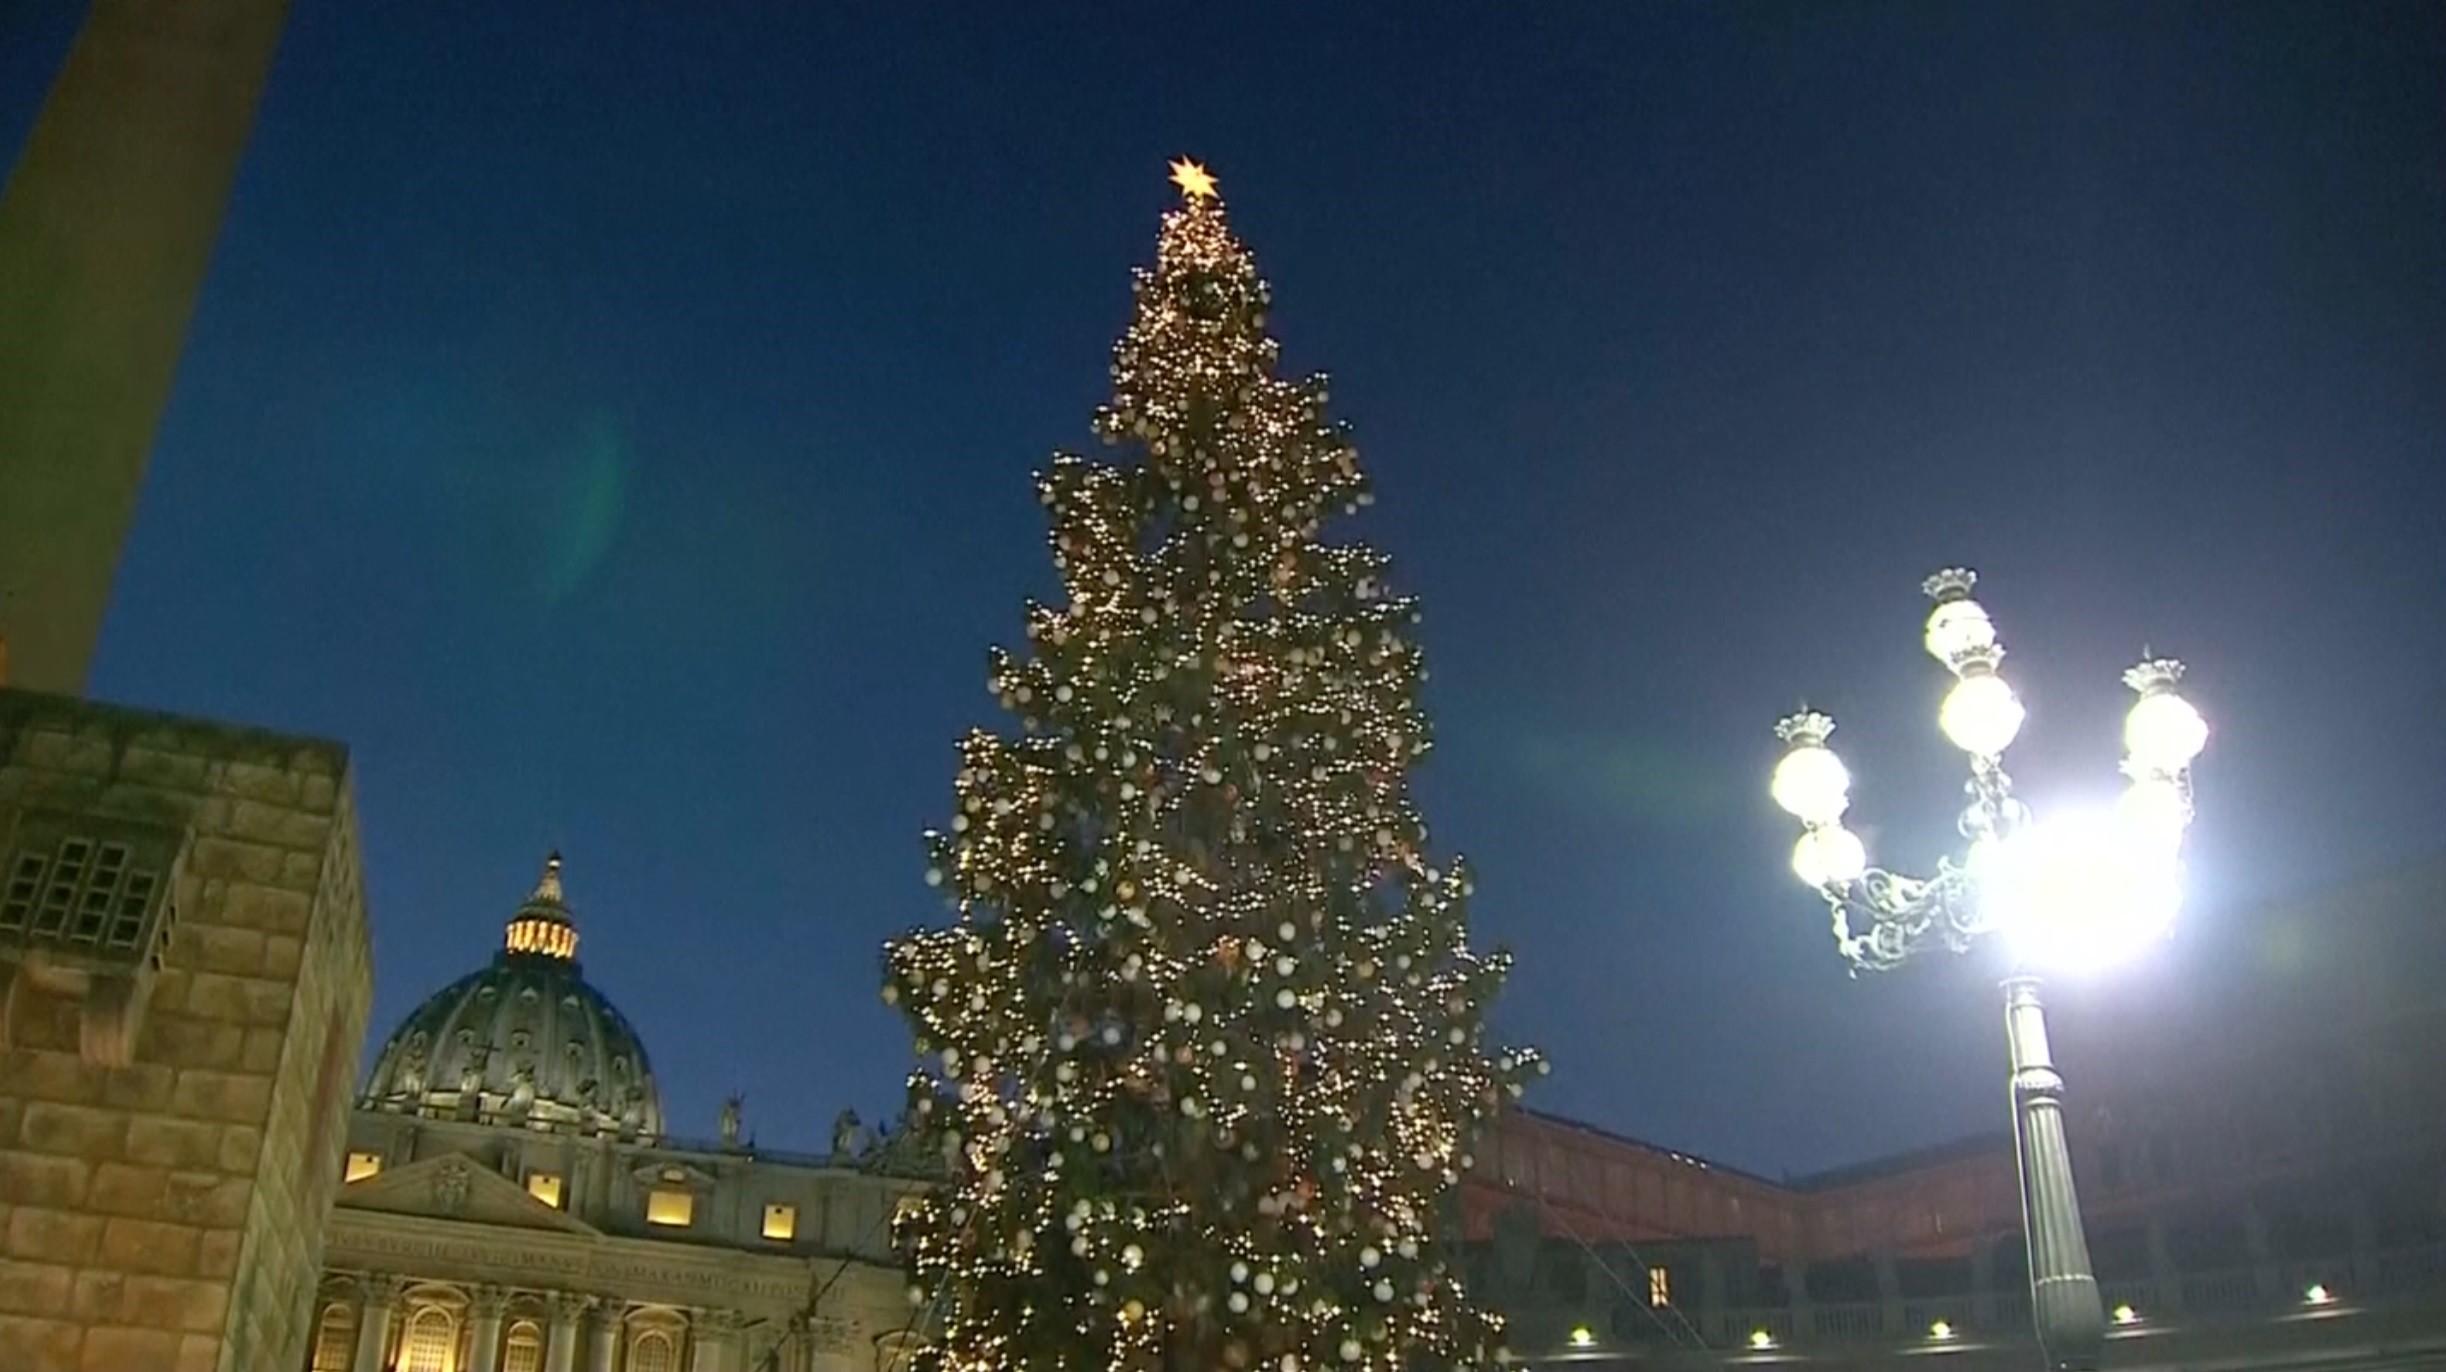 2446x1372 Vatican Christmas tree is lit in St. Peter's Square, adorned with ornaments  made from sick children across Italy and the nativity scene includes a  spire ...